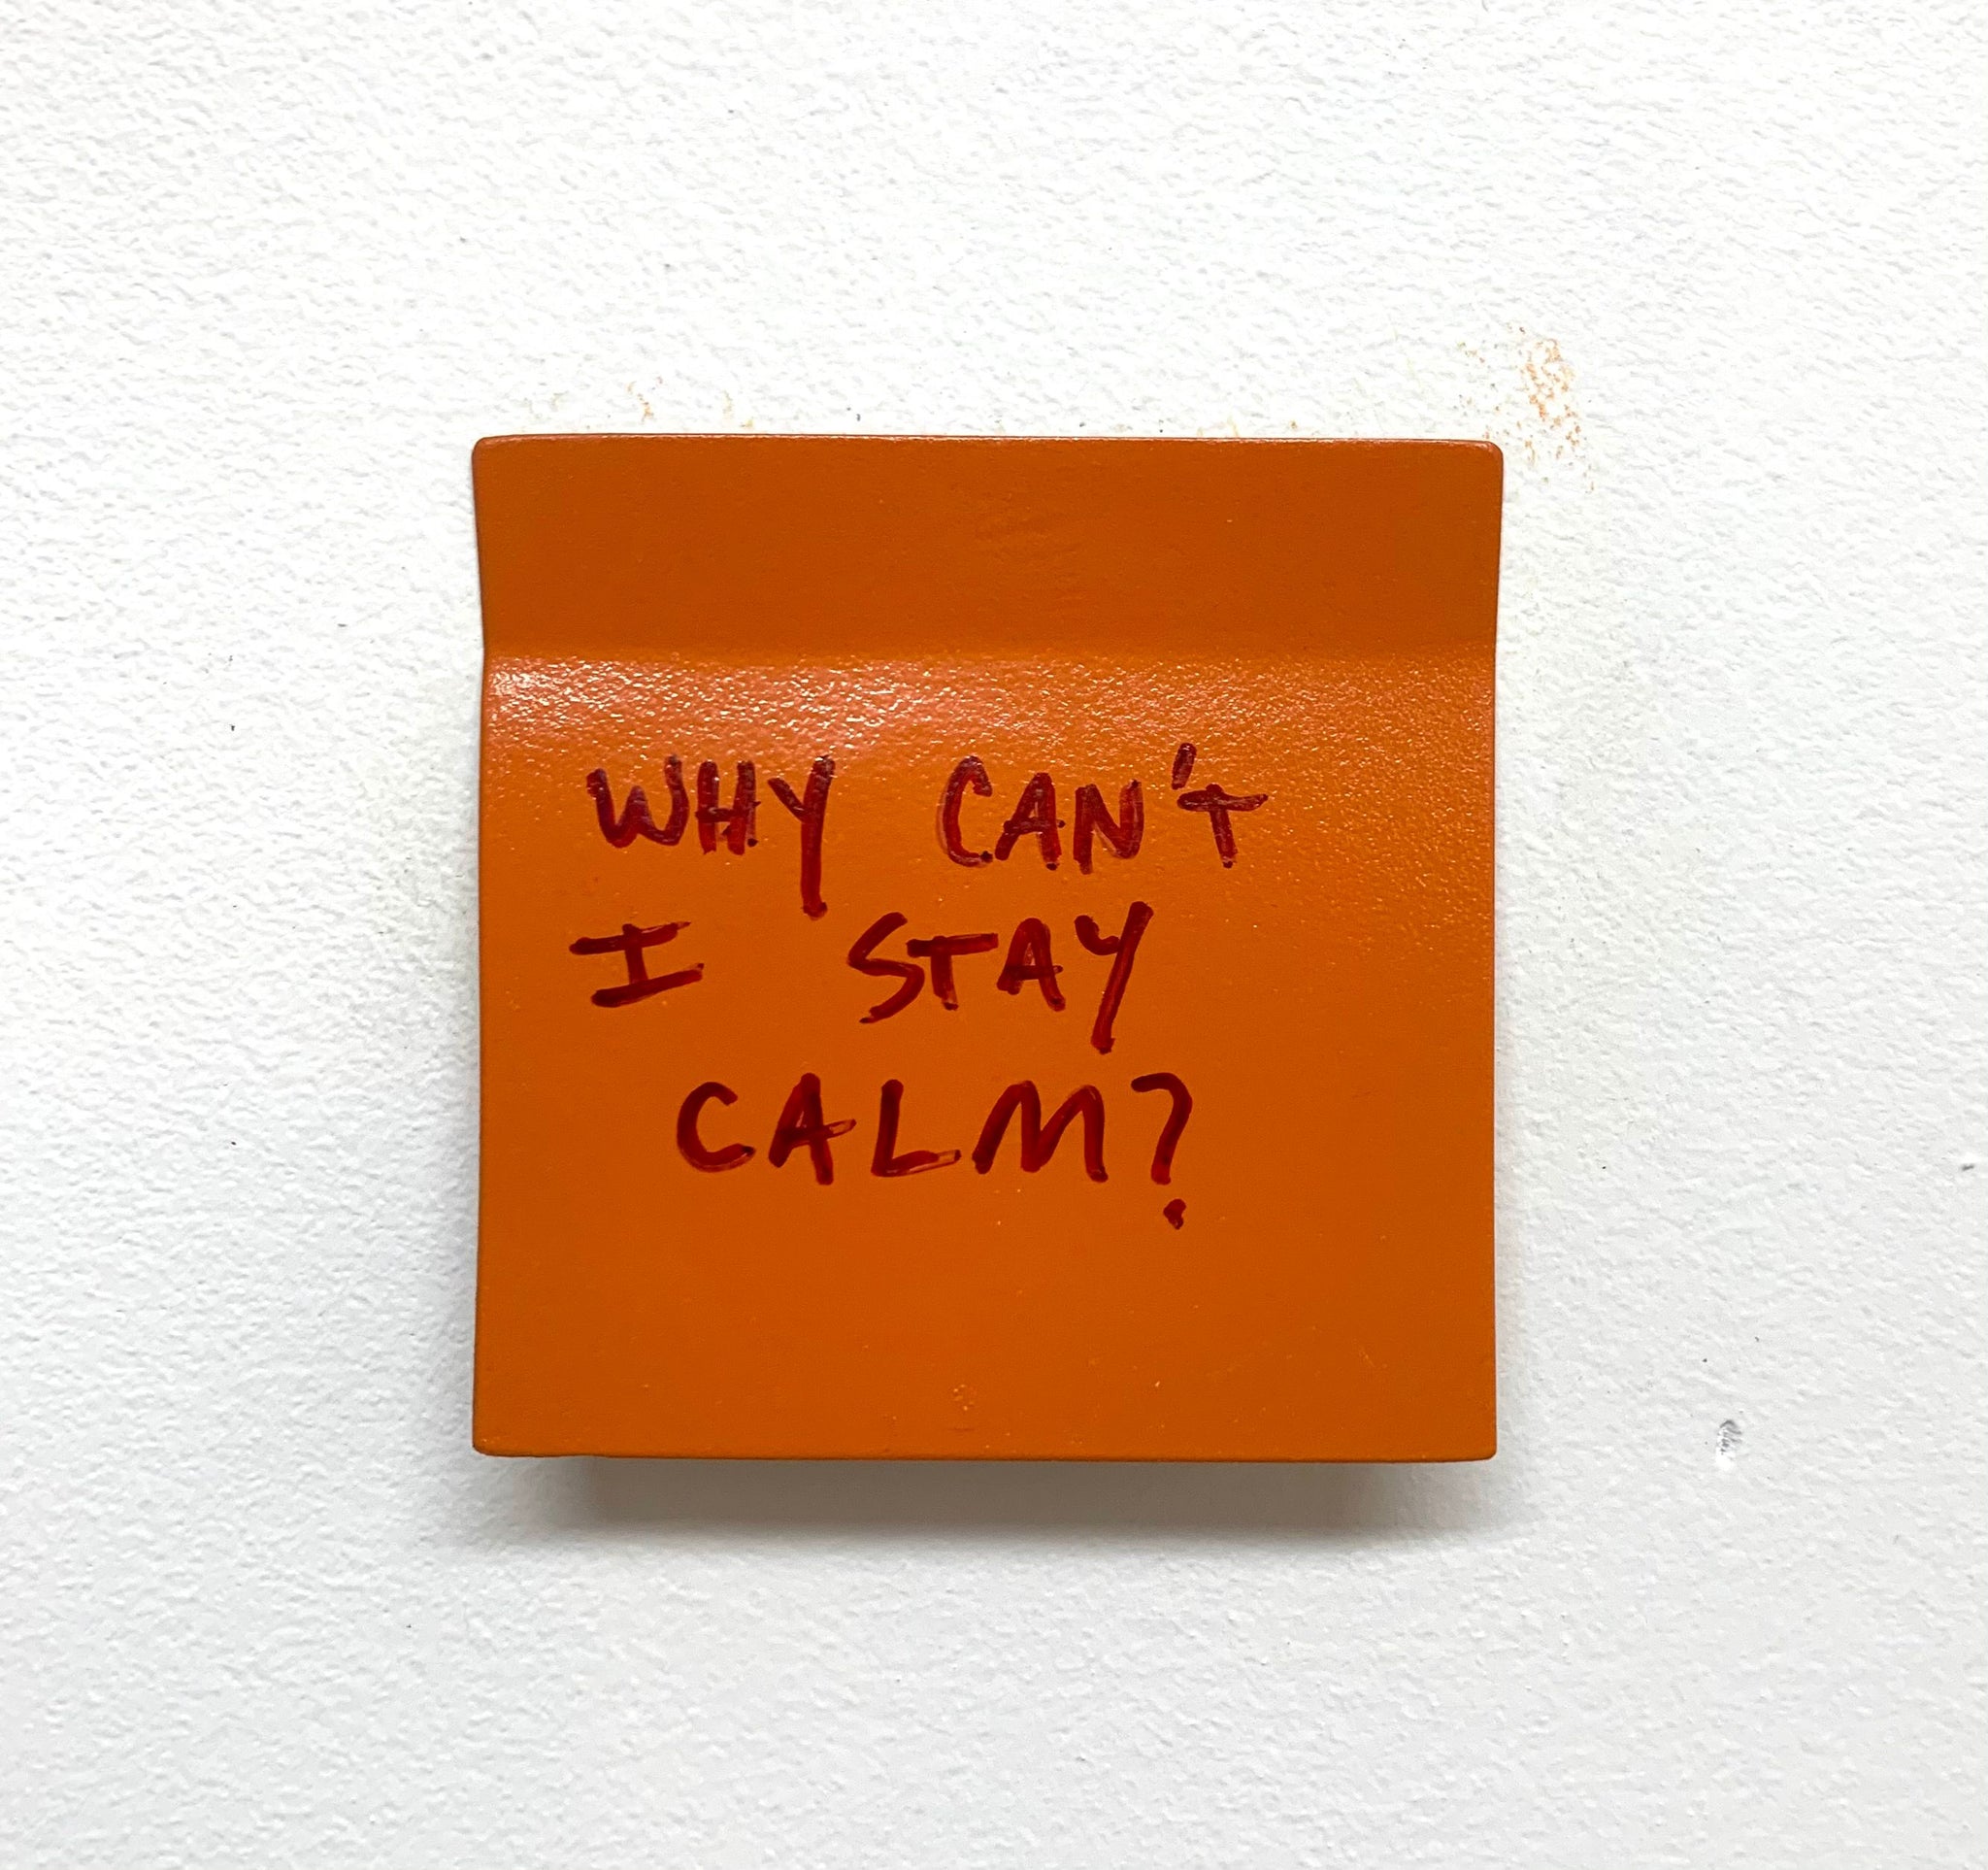 Stuart Lantry, "Why can't I stay calm?"